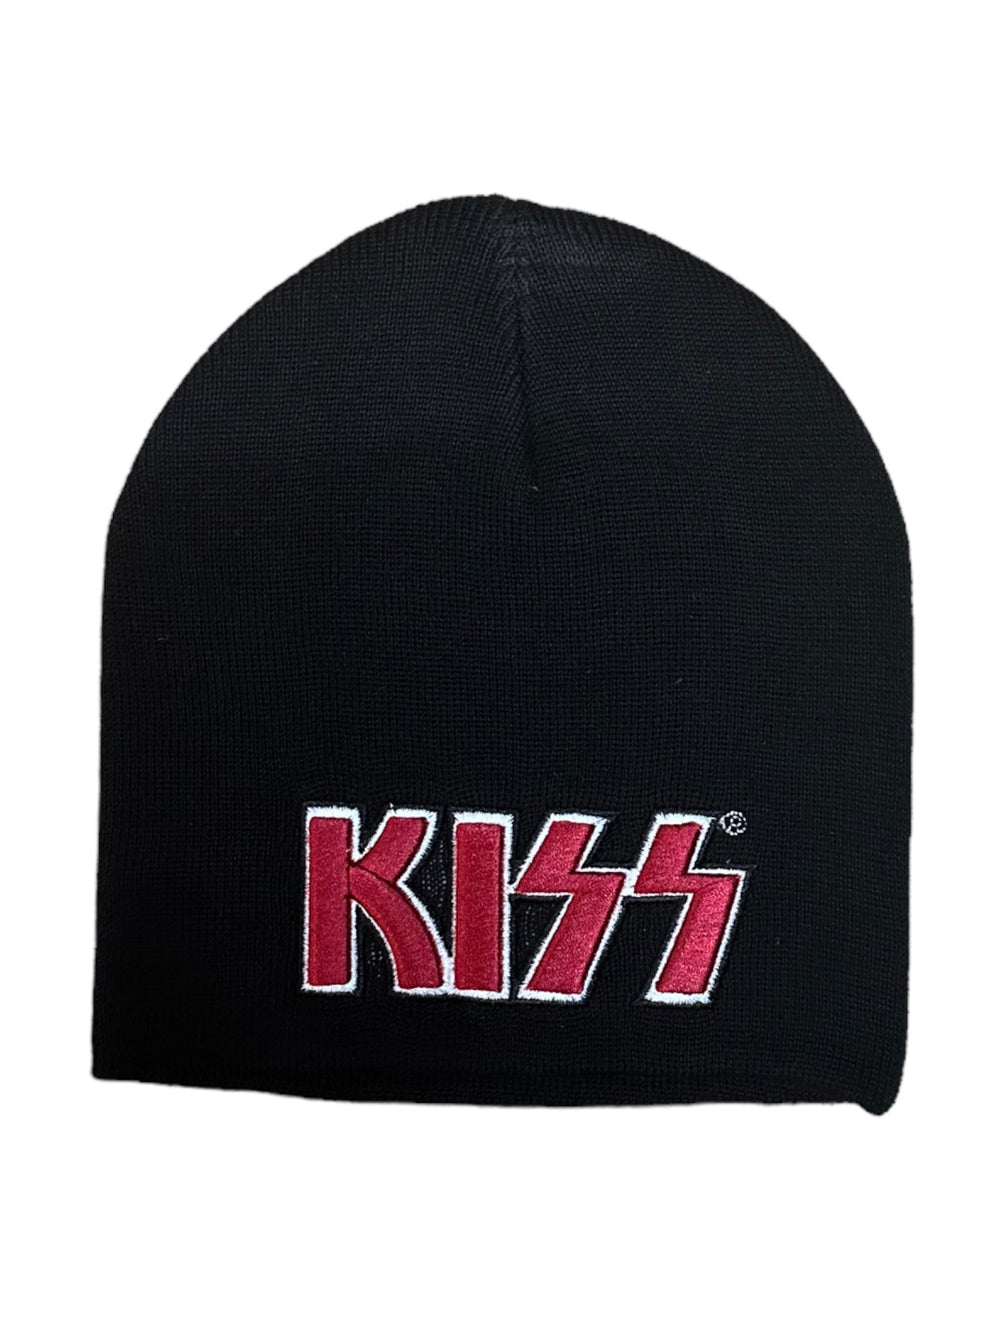 KISS - Red On White Logo Puff Official Beanie Hat One Size Fits All NEW